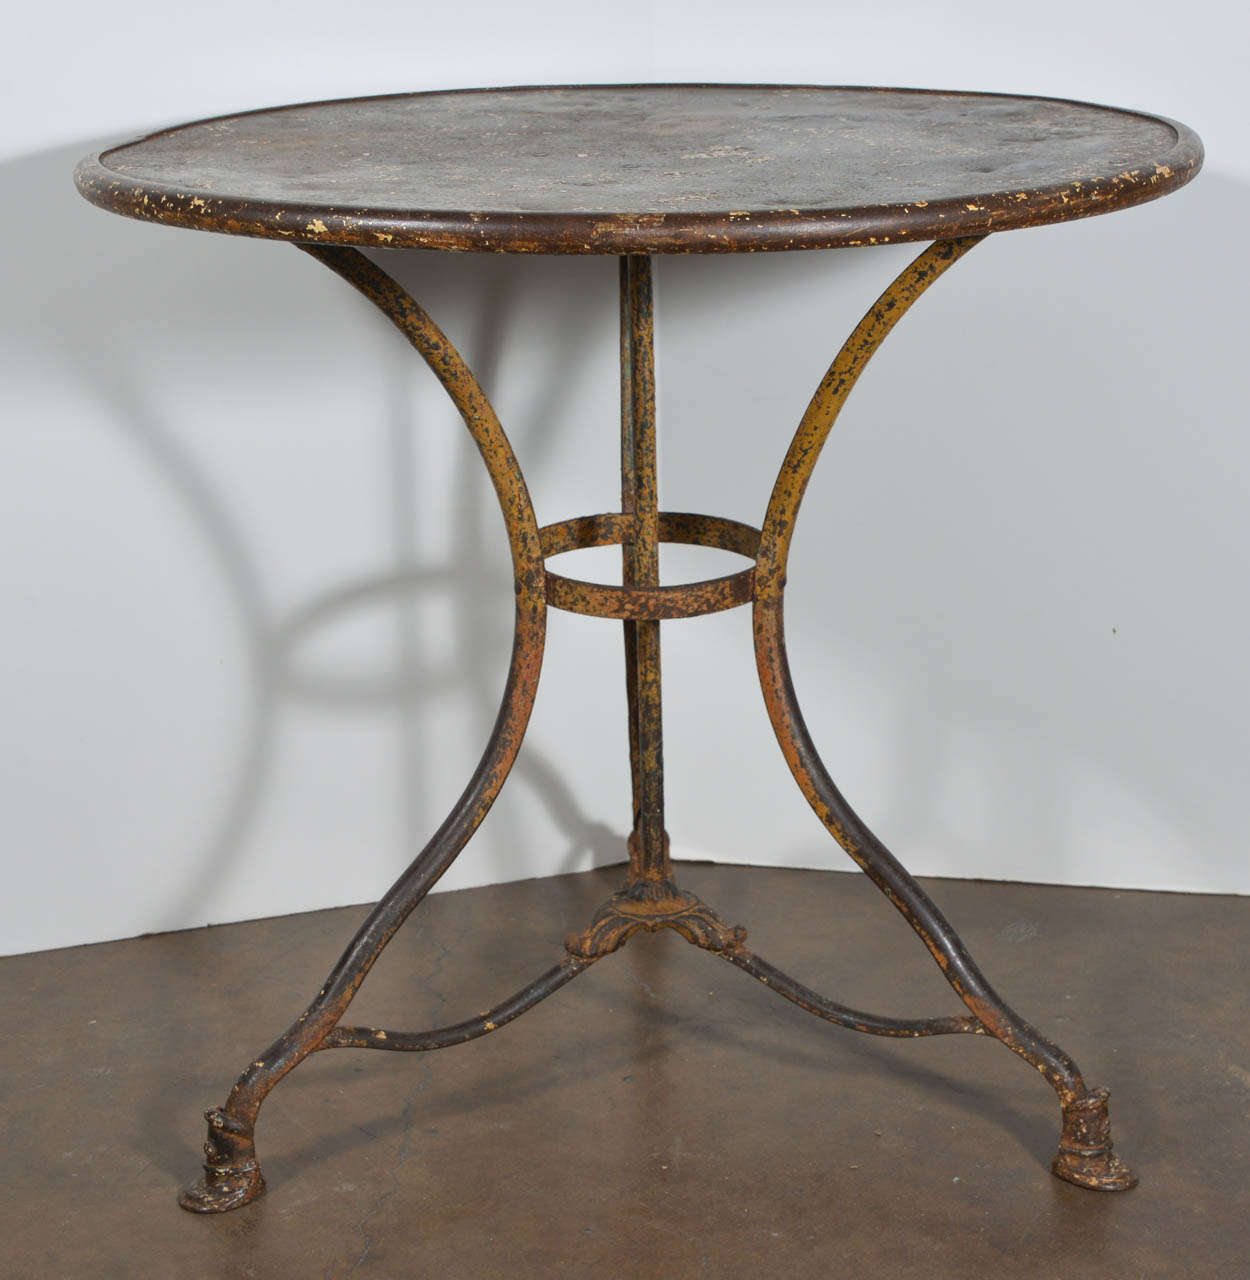 Wonderful garden table from Arras. Metal shows traces of original paint.